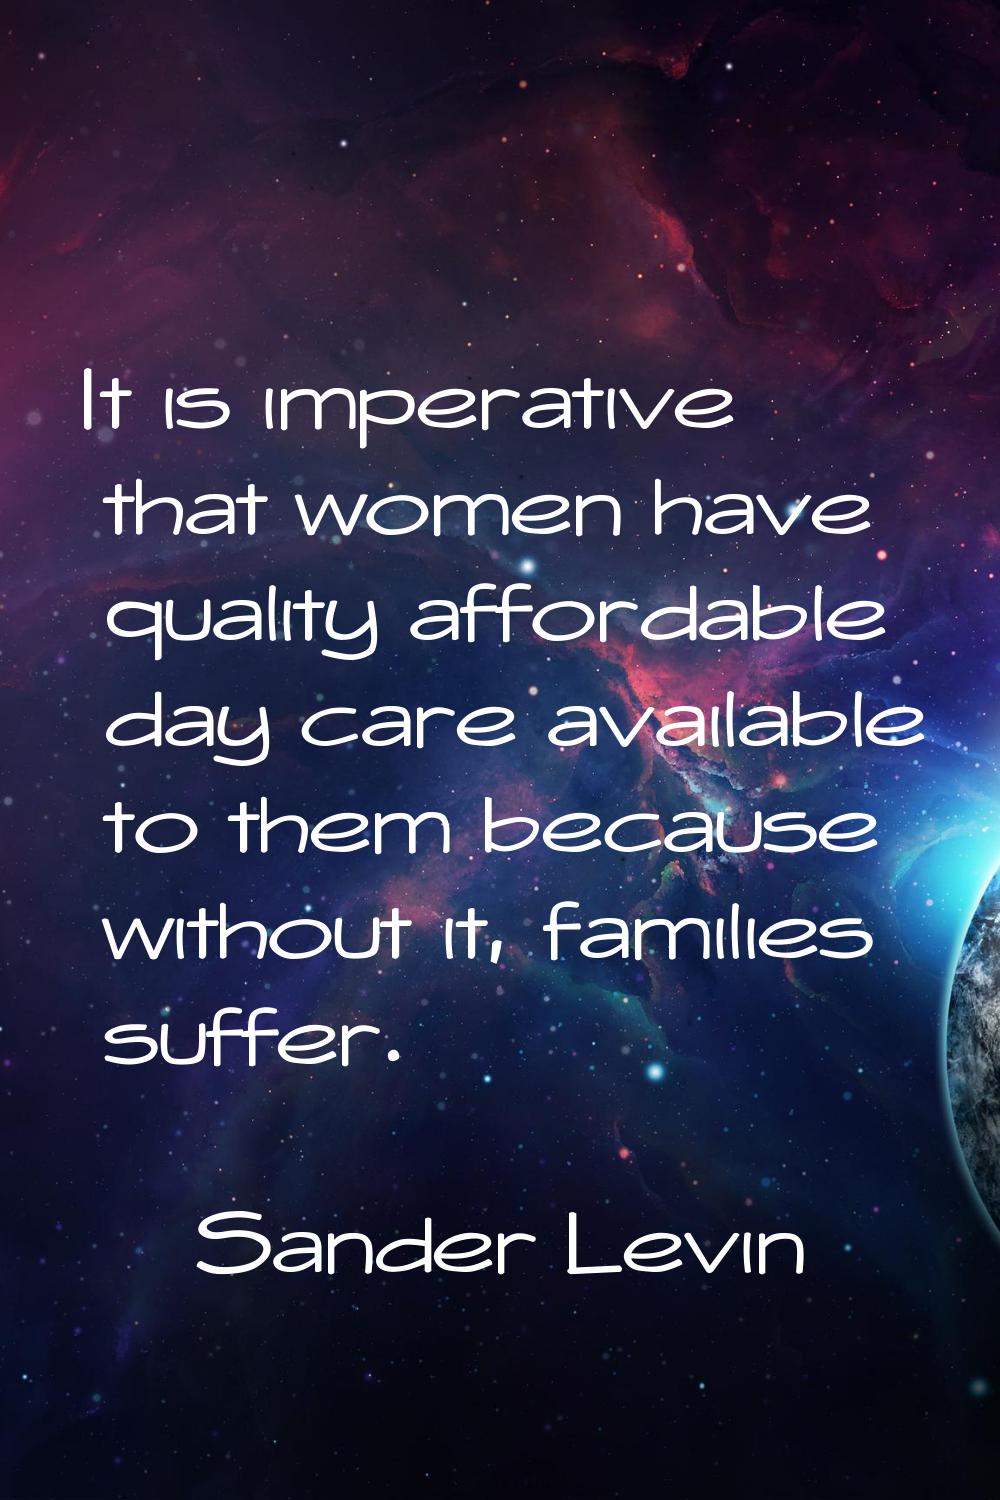 It is imperative that women have quality affordable day care available to them because without it, 